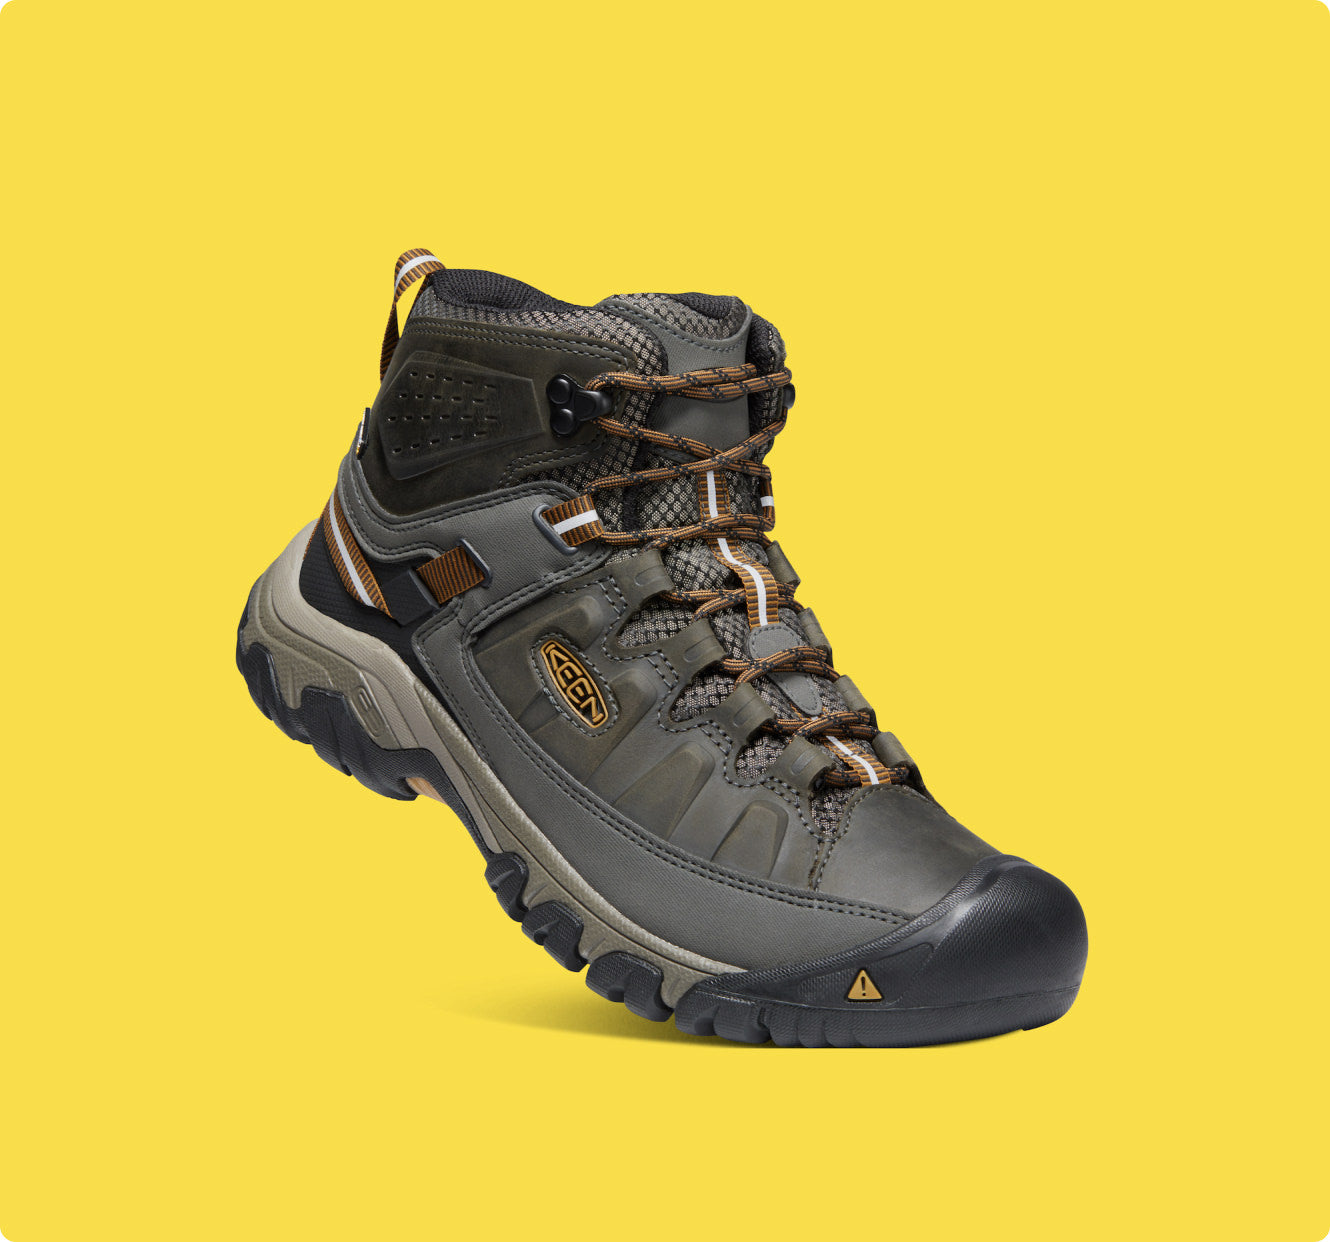 Targhee boot against yellow background